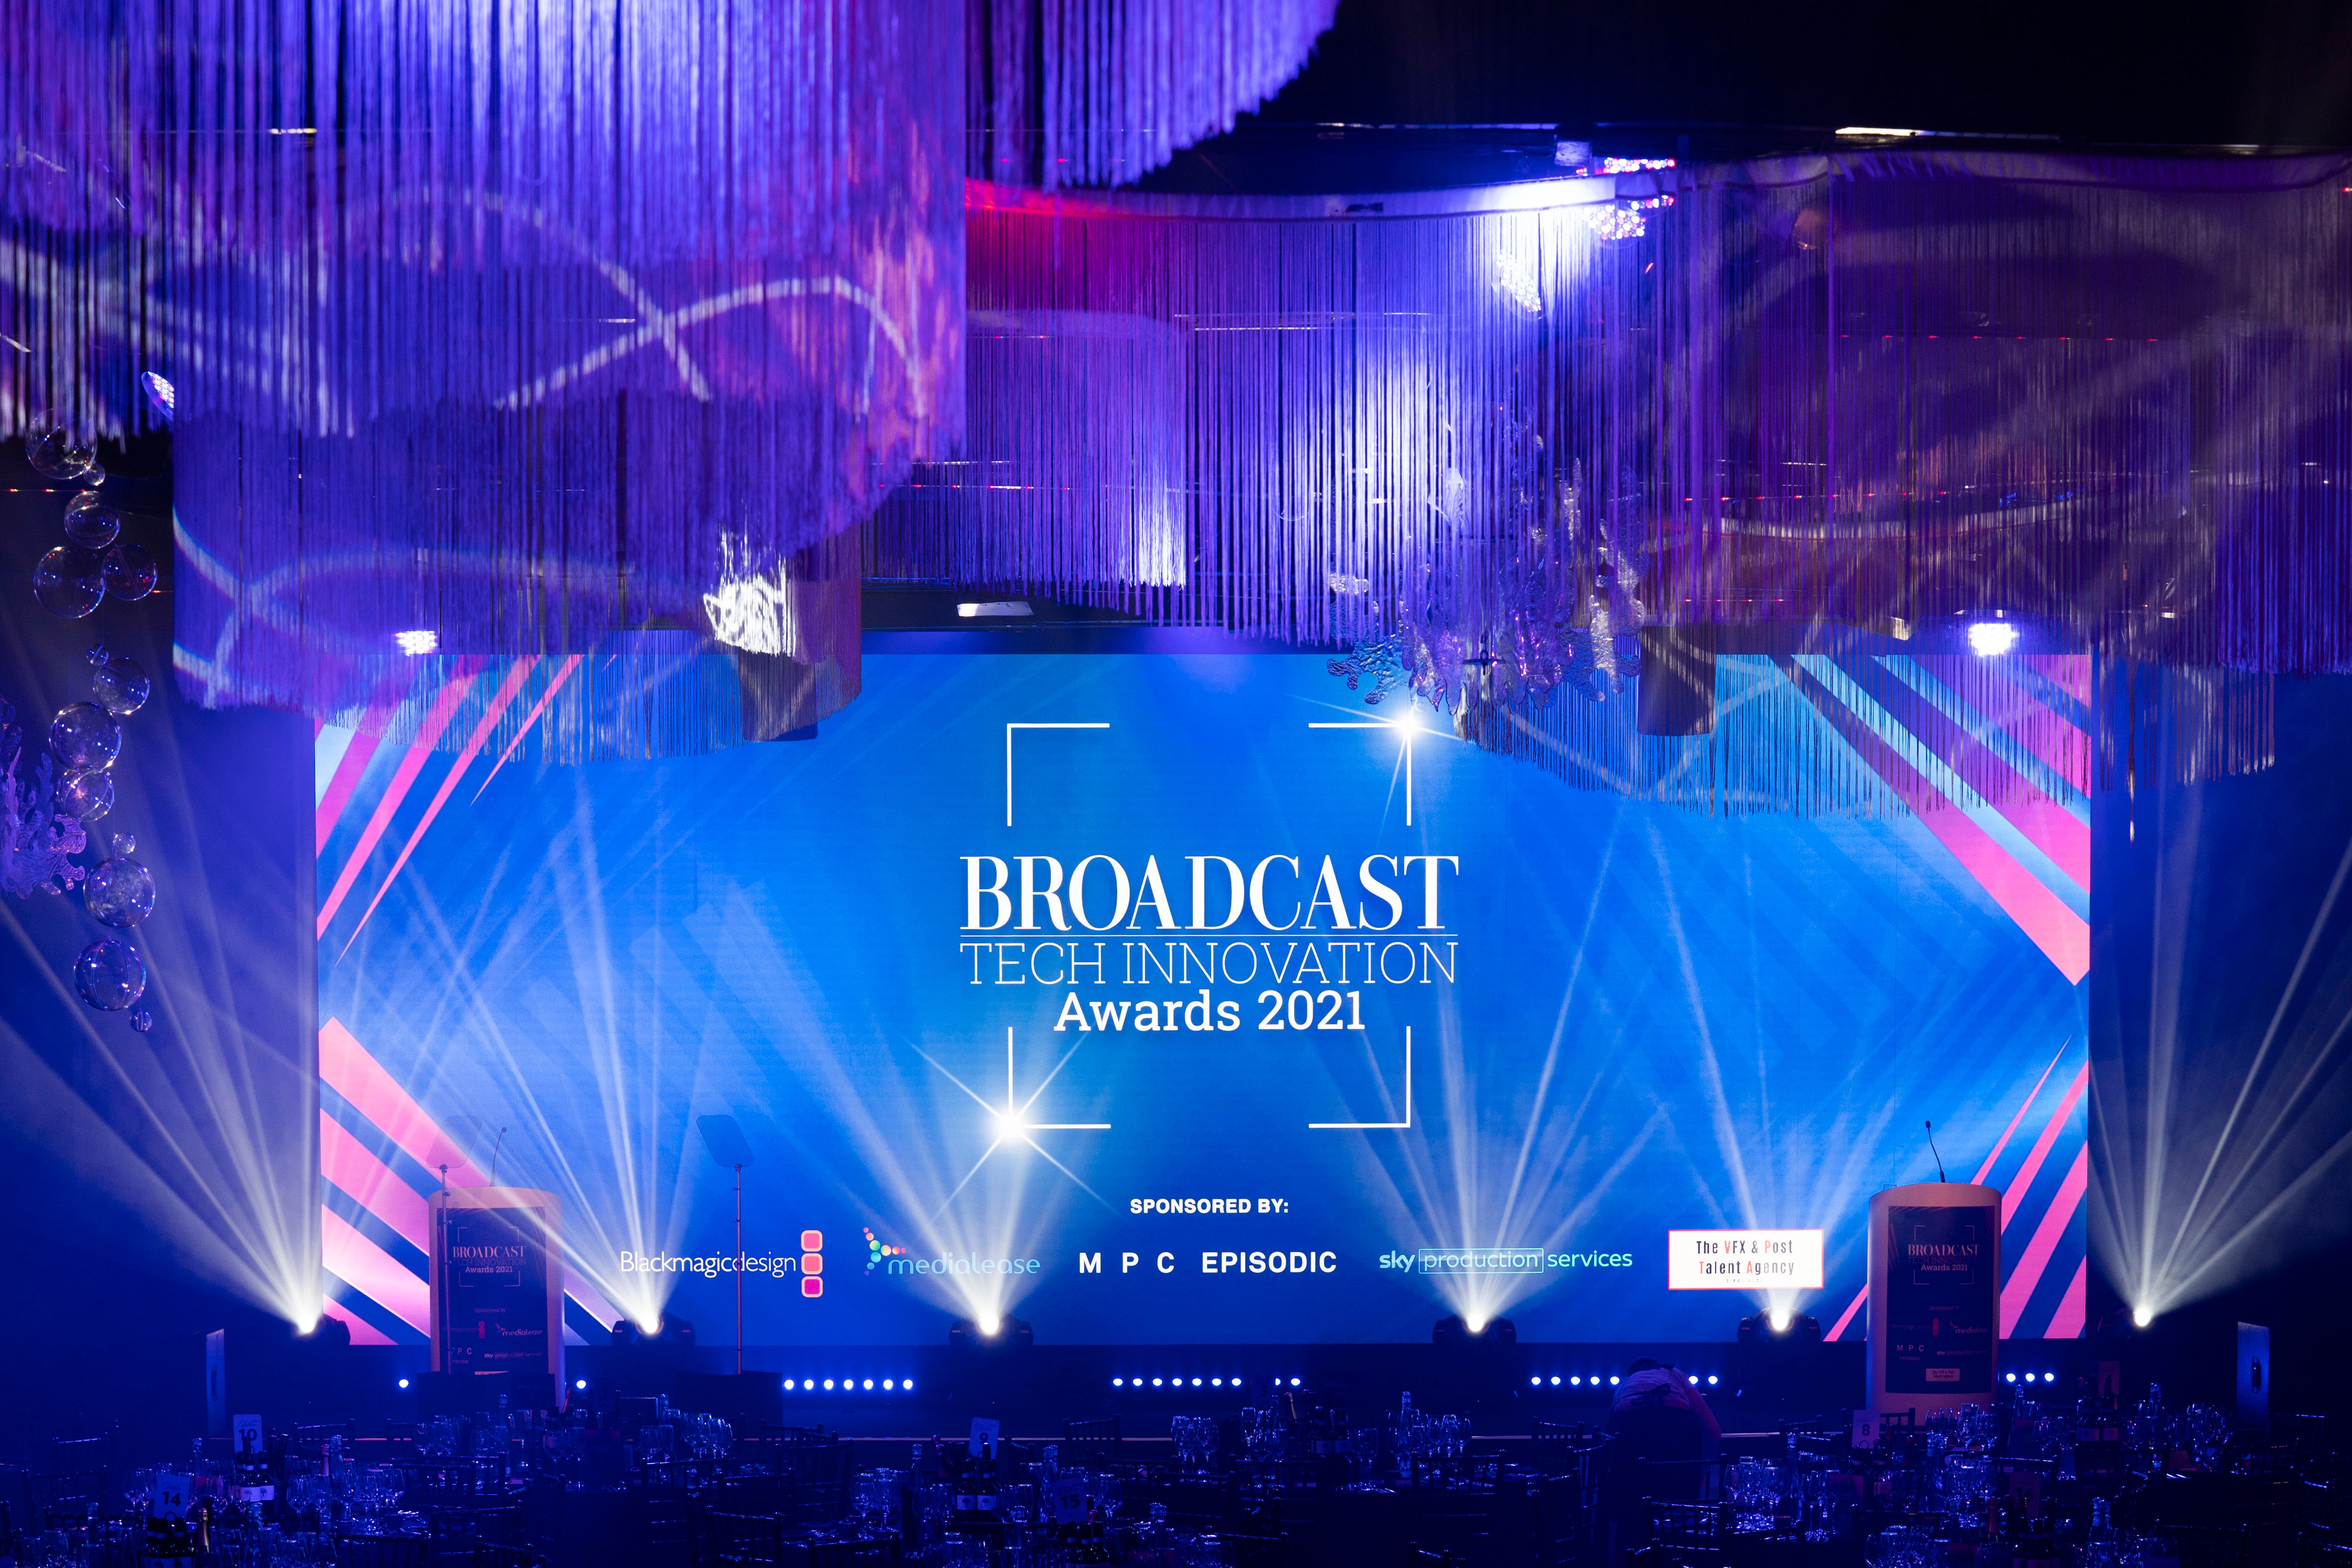 Broadcast Tech Innovation Awards - In the Room